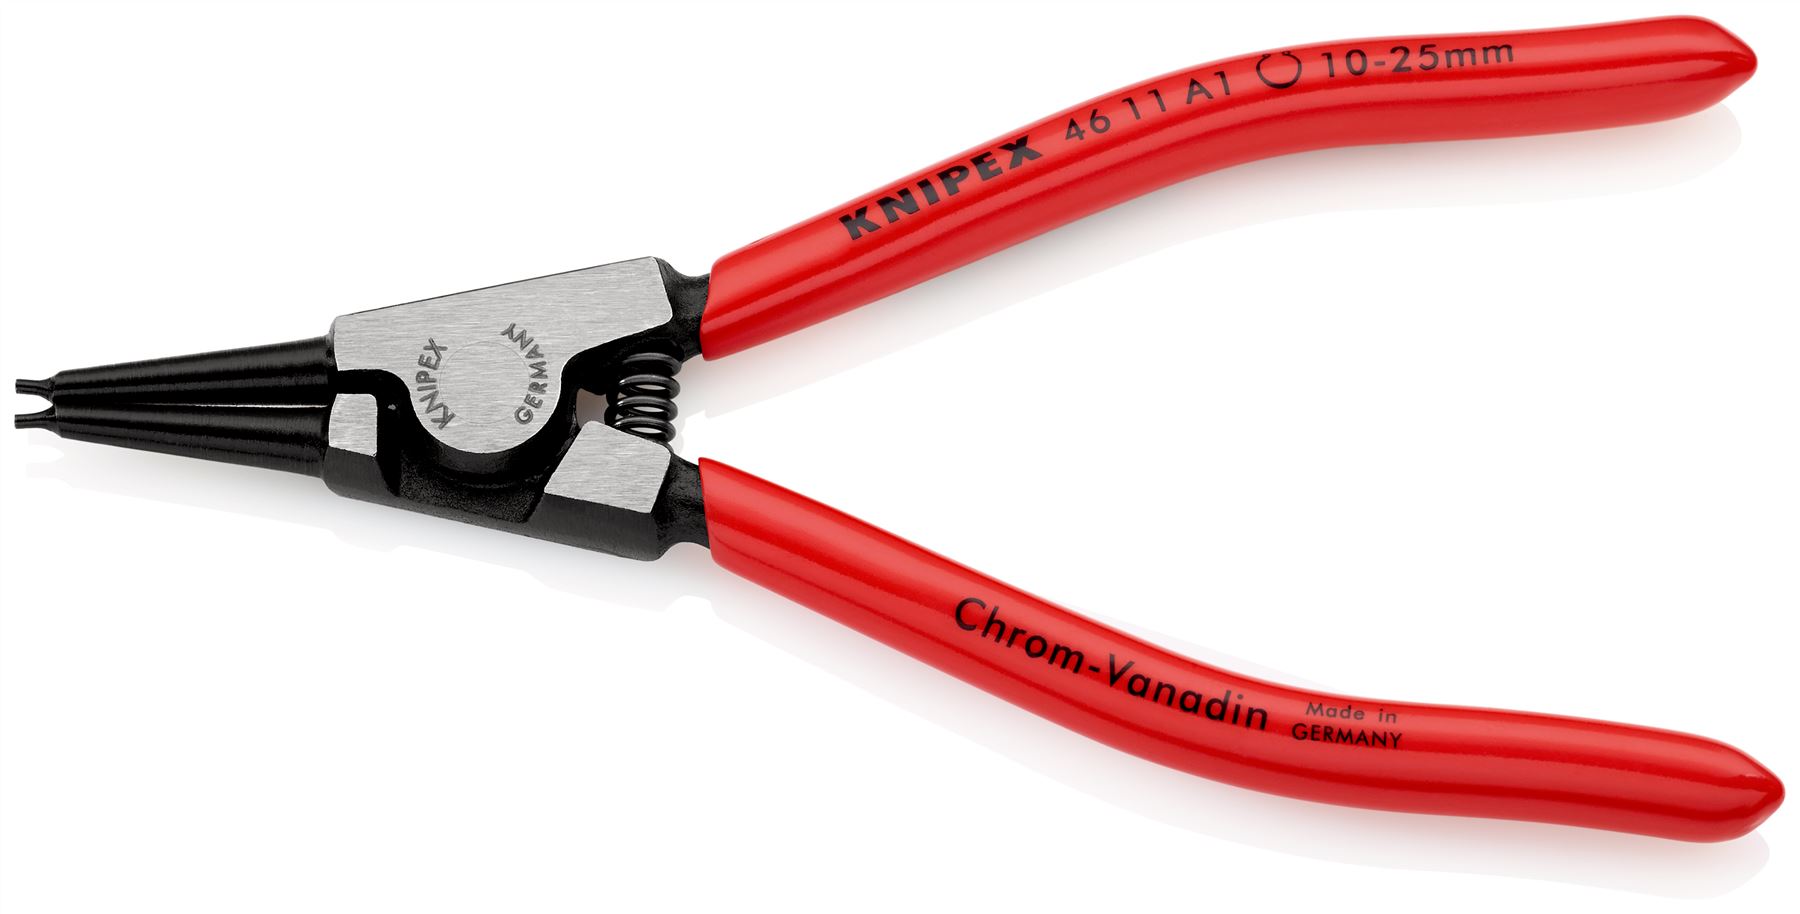 KNIPEX Circlip Pliers for External Circlips on Shafts 140mm 1.3mm Diameter Tips 46 11 A1 SB